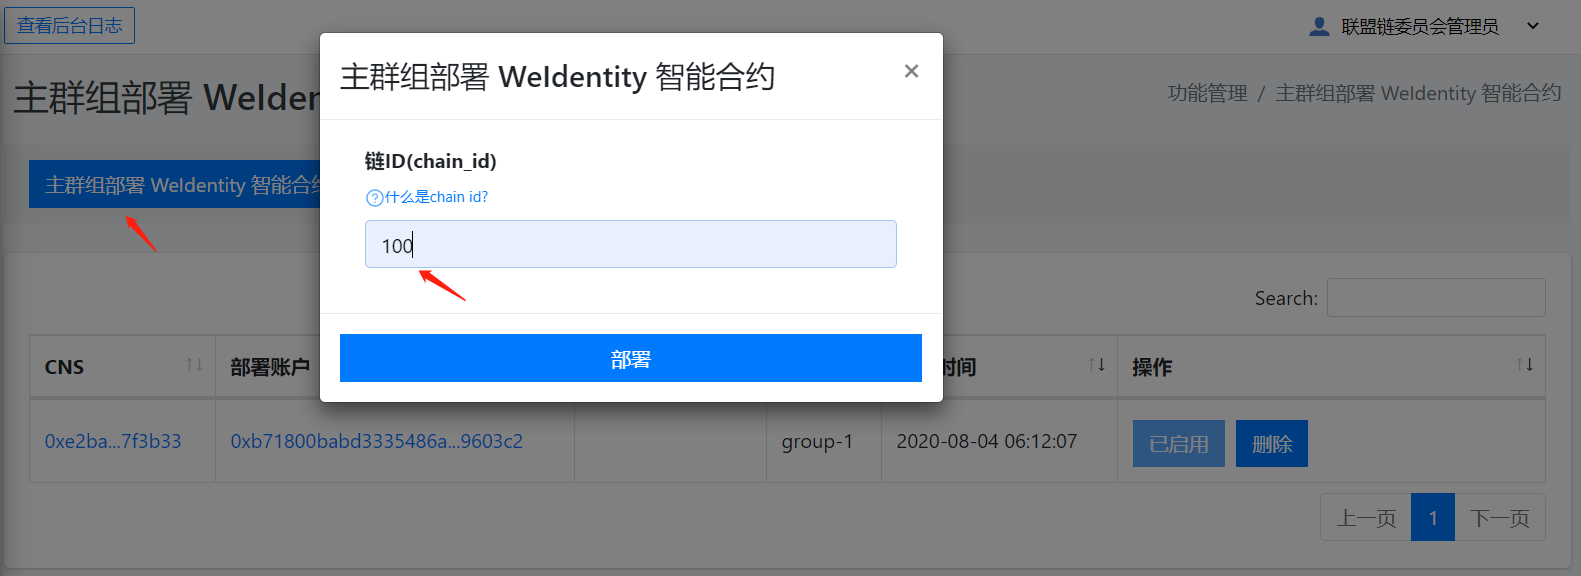 weidentity-quick-tools-web-deploy-weid-contract.png